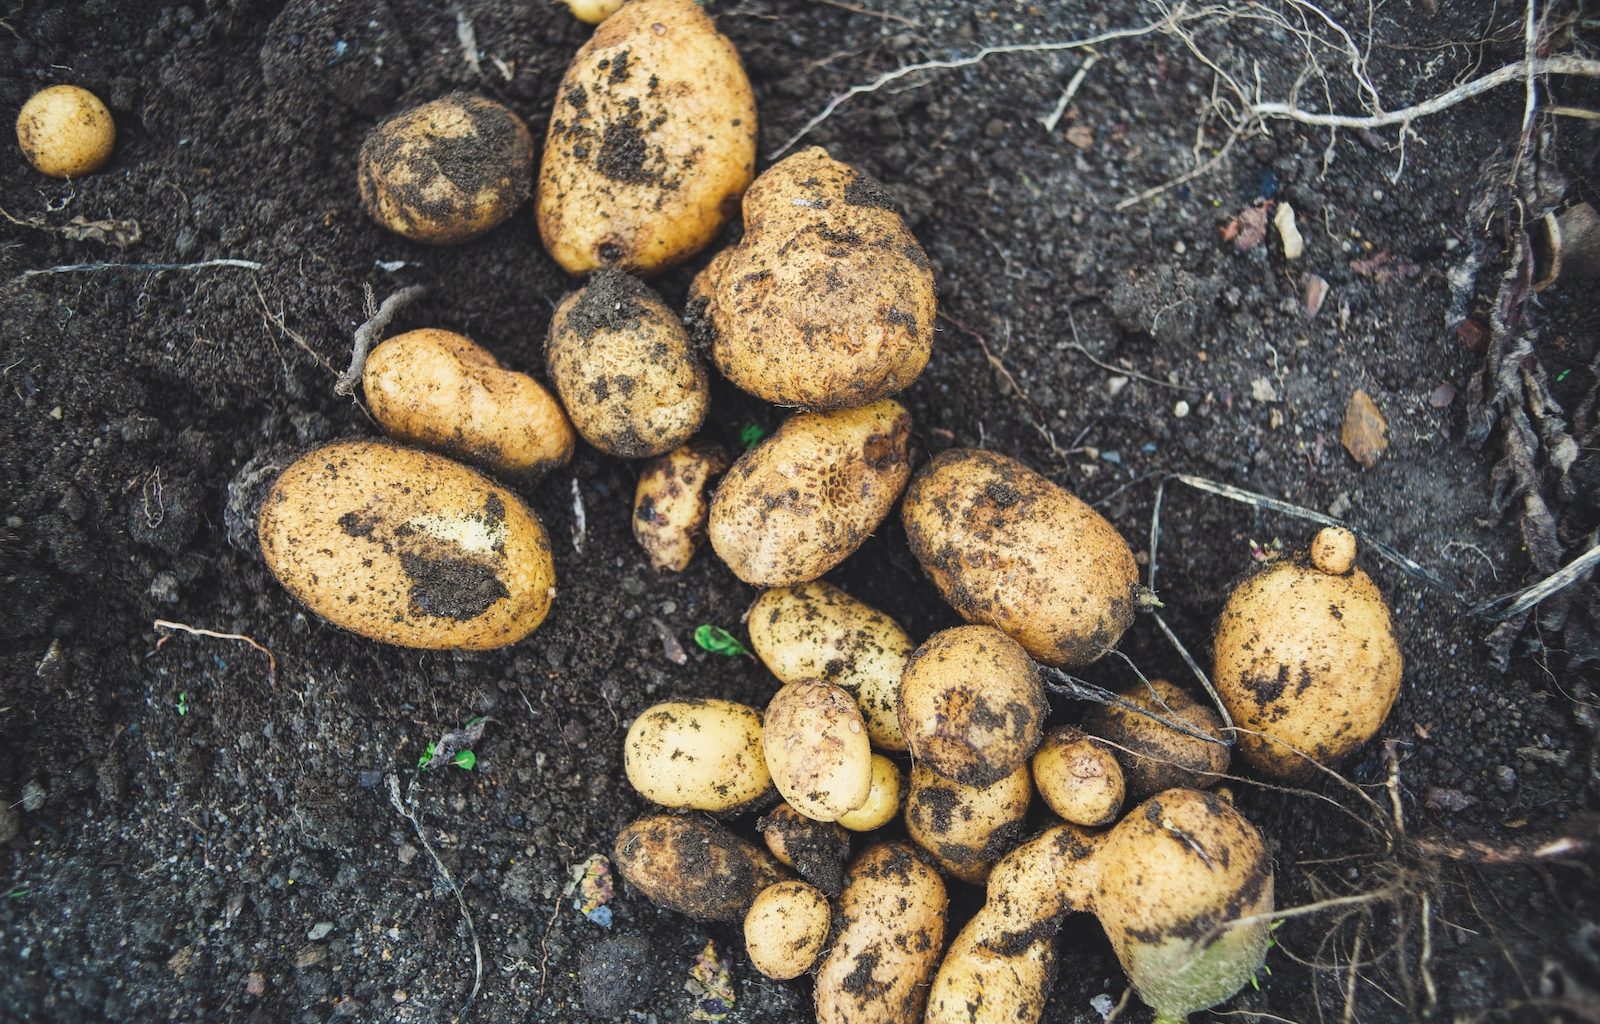 a pile of potatoes sitting on top of a dirt field